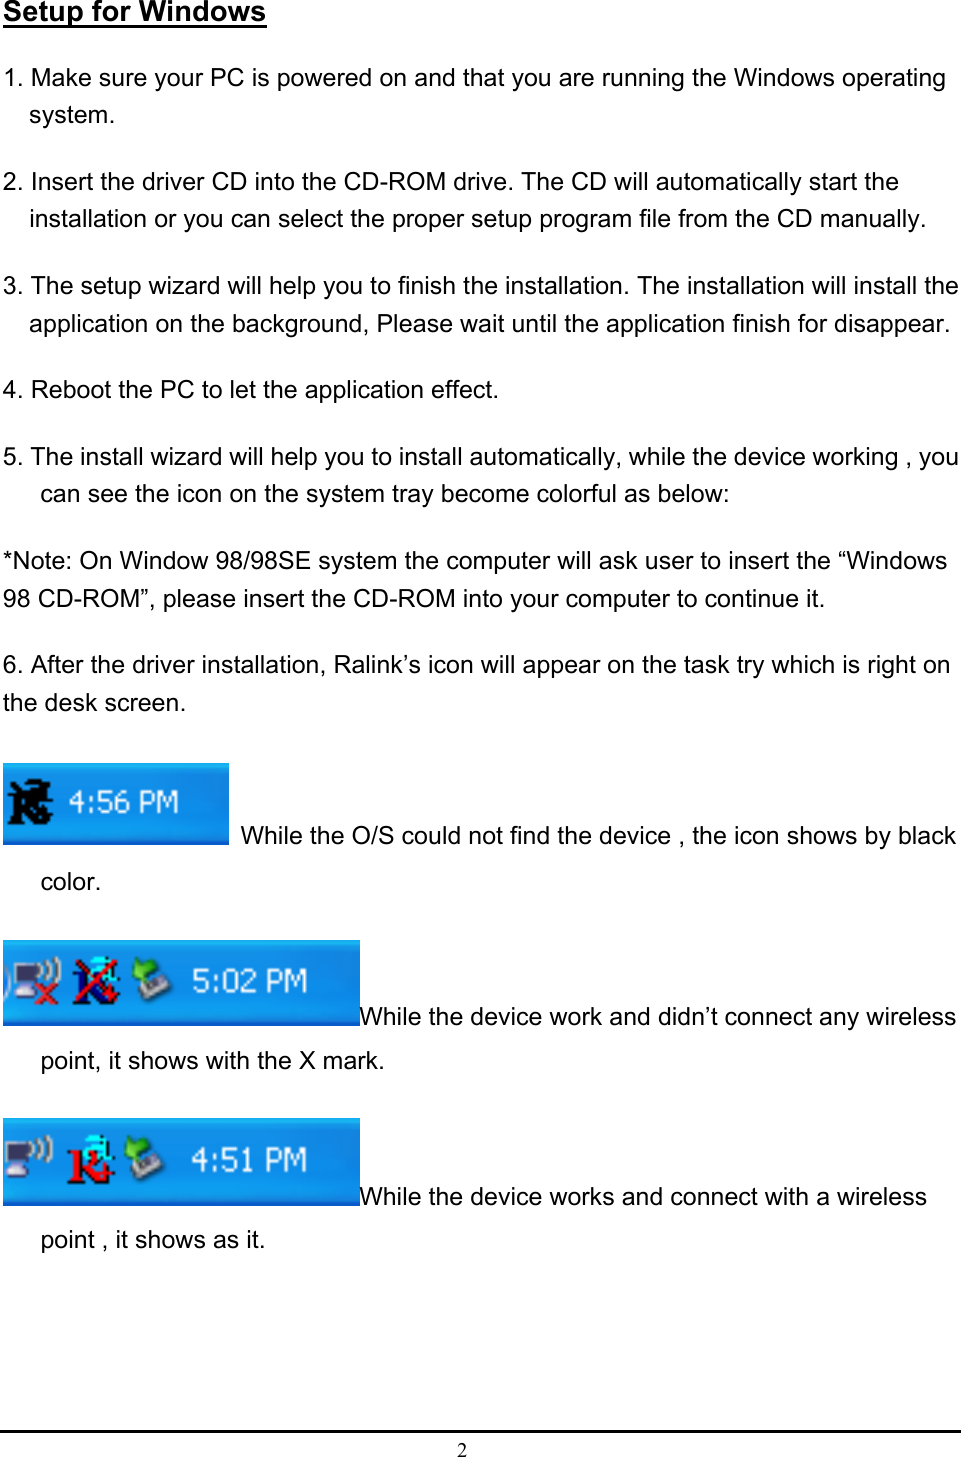 2  Setup for Windows 1. Make sure your PC is powered on and that you are running the Windows operating system. 2. Insert the driver CD into the CD-ROM drive. The CD will automatically start the installation or you can select the proper setup program file from the CD manually.   3. The setup wizard will help you to finish the installation. The installation will install the application on the background, Please wait until the application finish for disappear. 4. Reboot the PC to let the application effect. 5. The install wizard will help you to install automatically, while the device working , you can see the icon on the system tray become colorful as below: *Note: On Window 98/98SE system the computer will ask user to insert the “Windows 98 CD-ROM”, please insert the CD-ROM into your computer to continue it. 6. After the driver installation, Ralink’s icon will appear on the task try which is right on the desk screen.   While the O/S could not find the device , the icon shows by black color. While the device work and didn’t connect any wireless point, it shows with the X mark. While the device works and connect with a wireless point , it shows as it.   